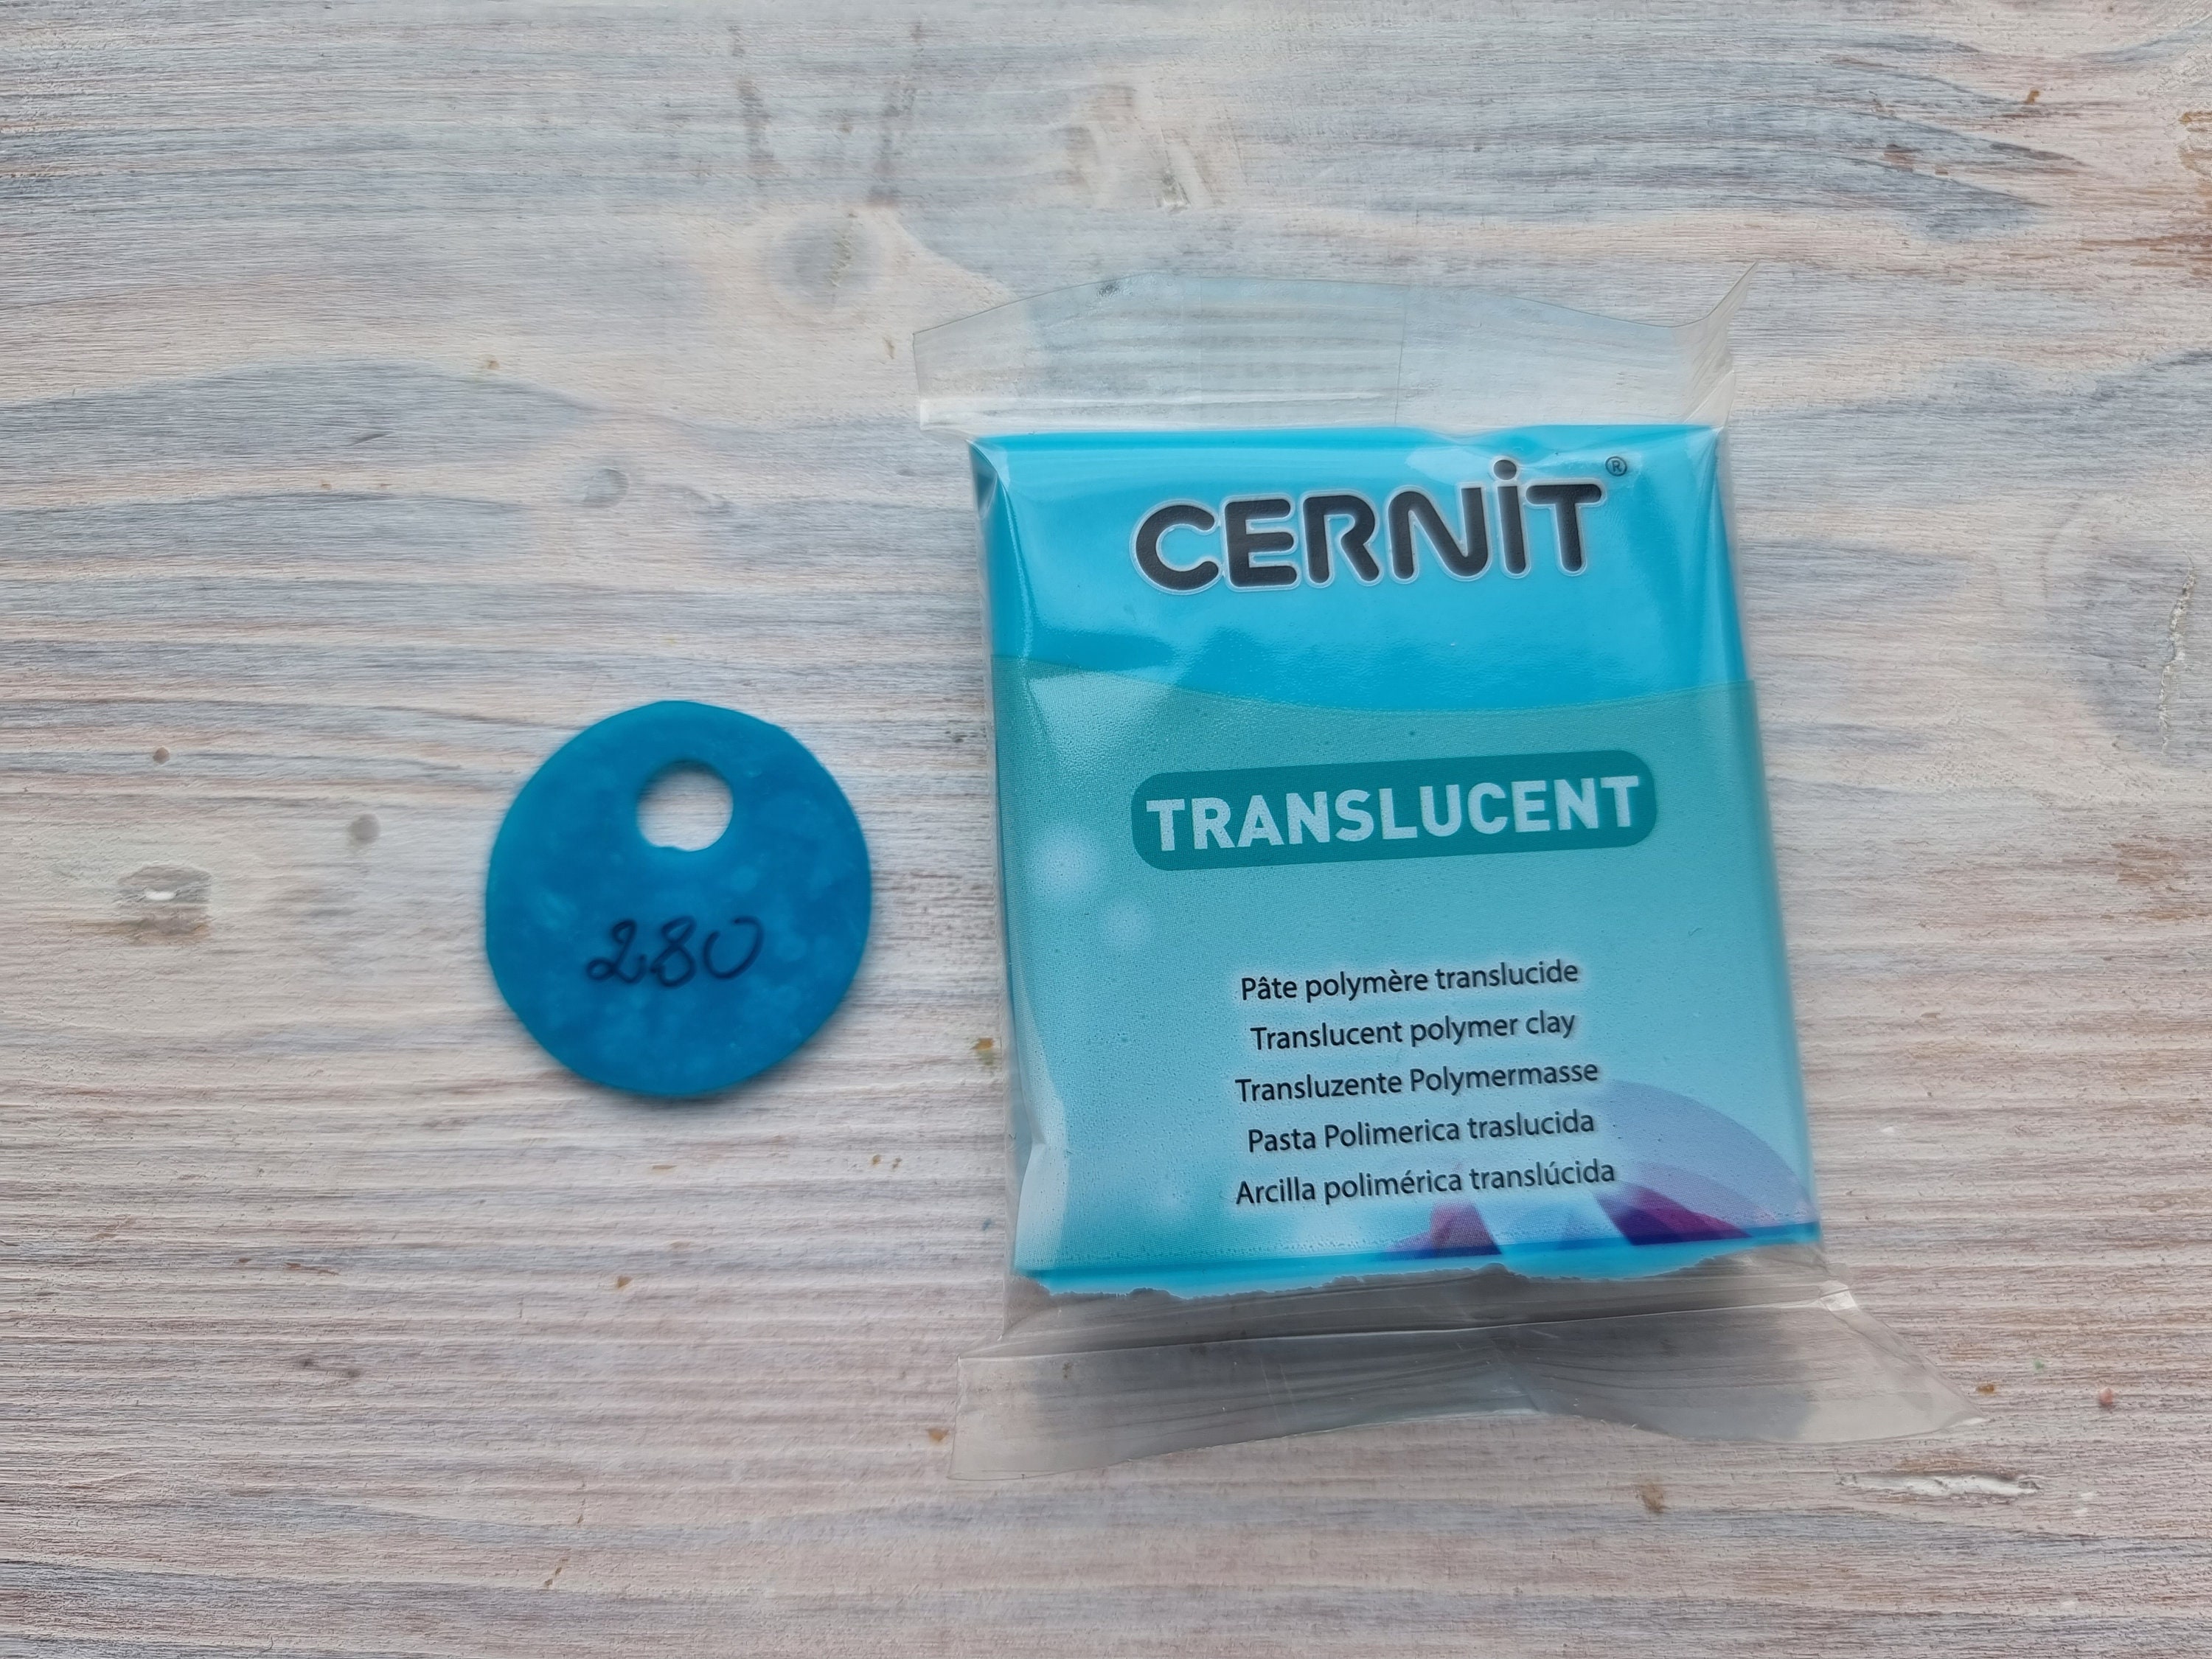 CERNIT Translucent Serie Polymer Clay, Turquoise Blue, Nr. 280 Polymer  Clay, 56g 2oz, Oven-hardening Polymer Modeling Clay 